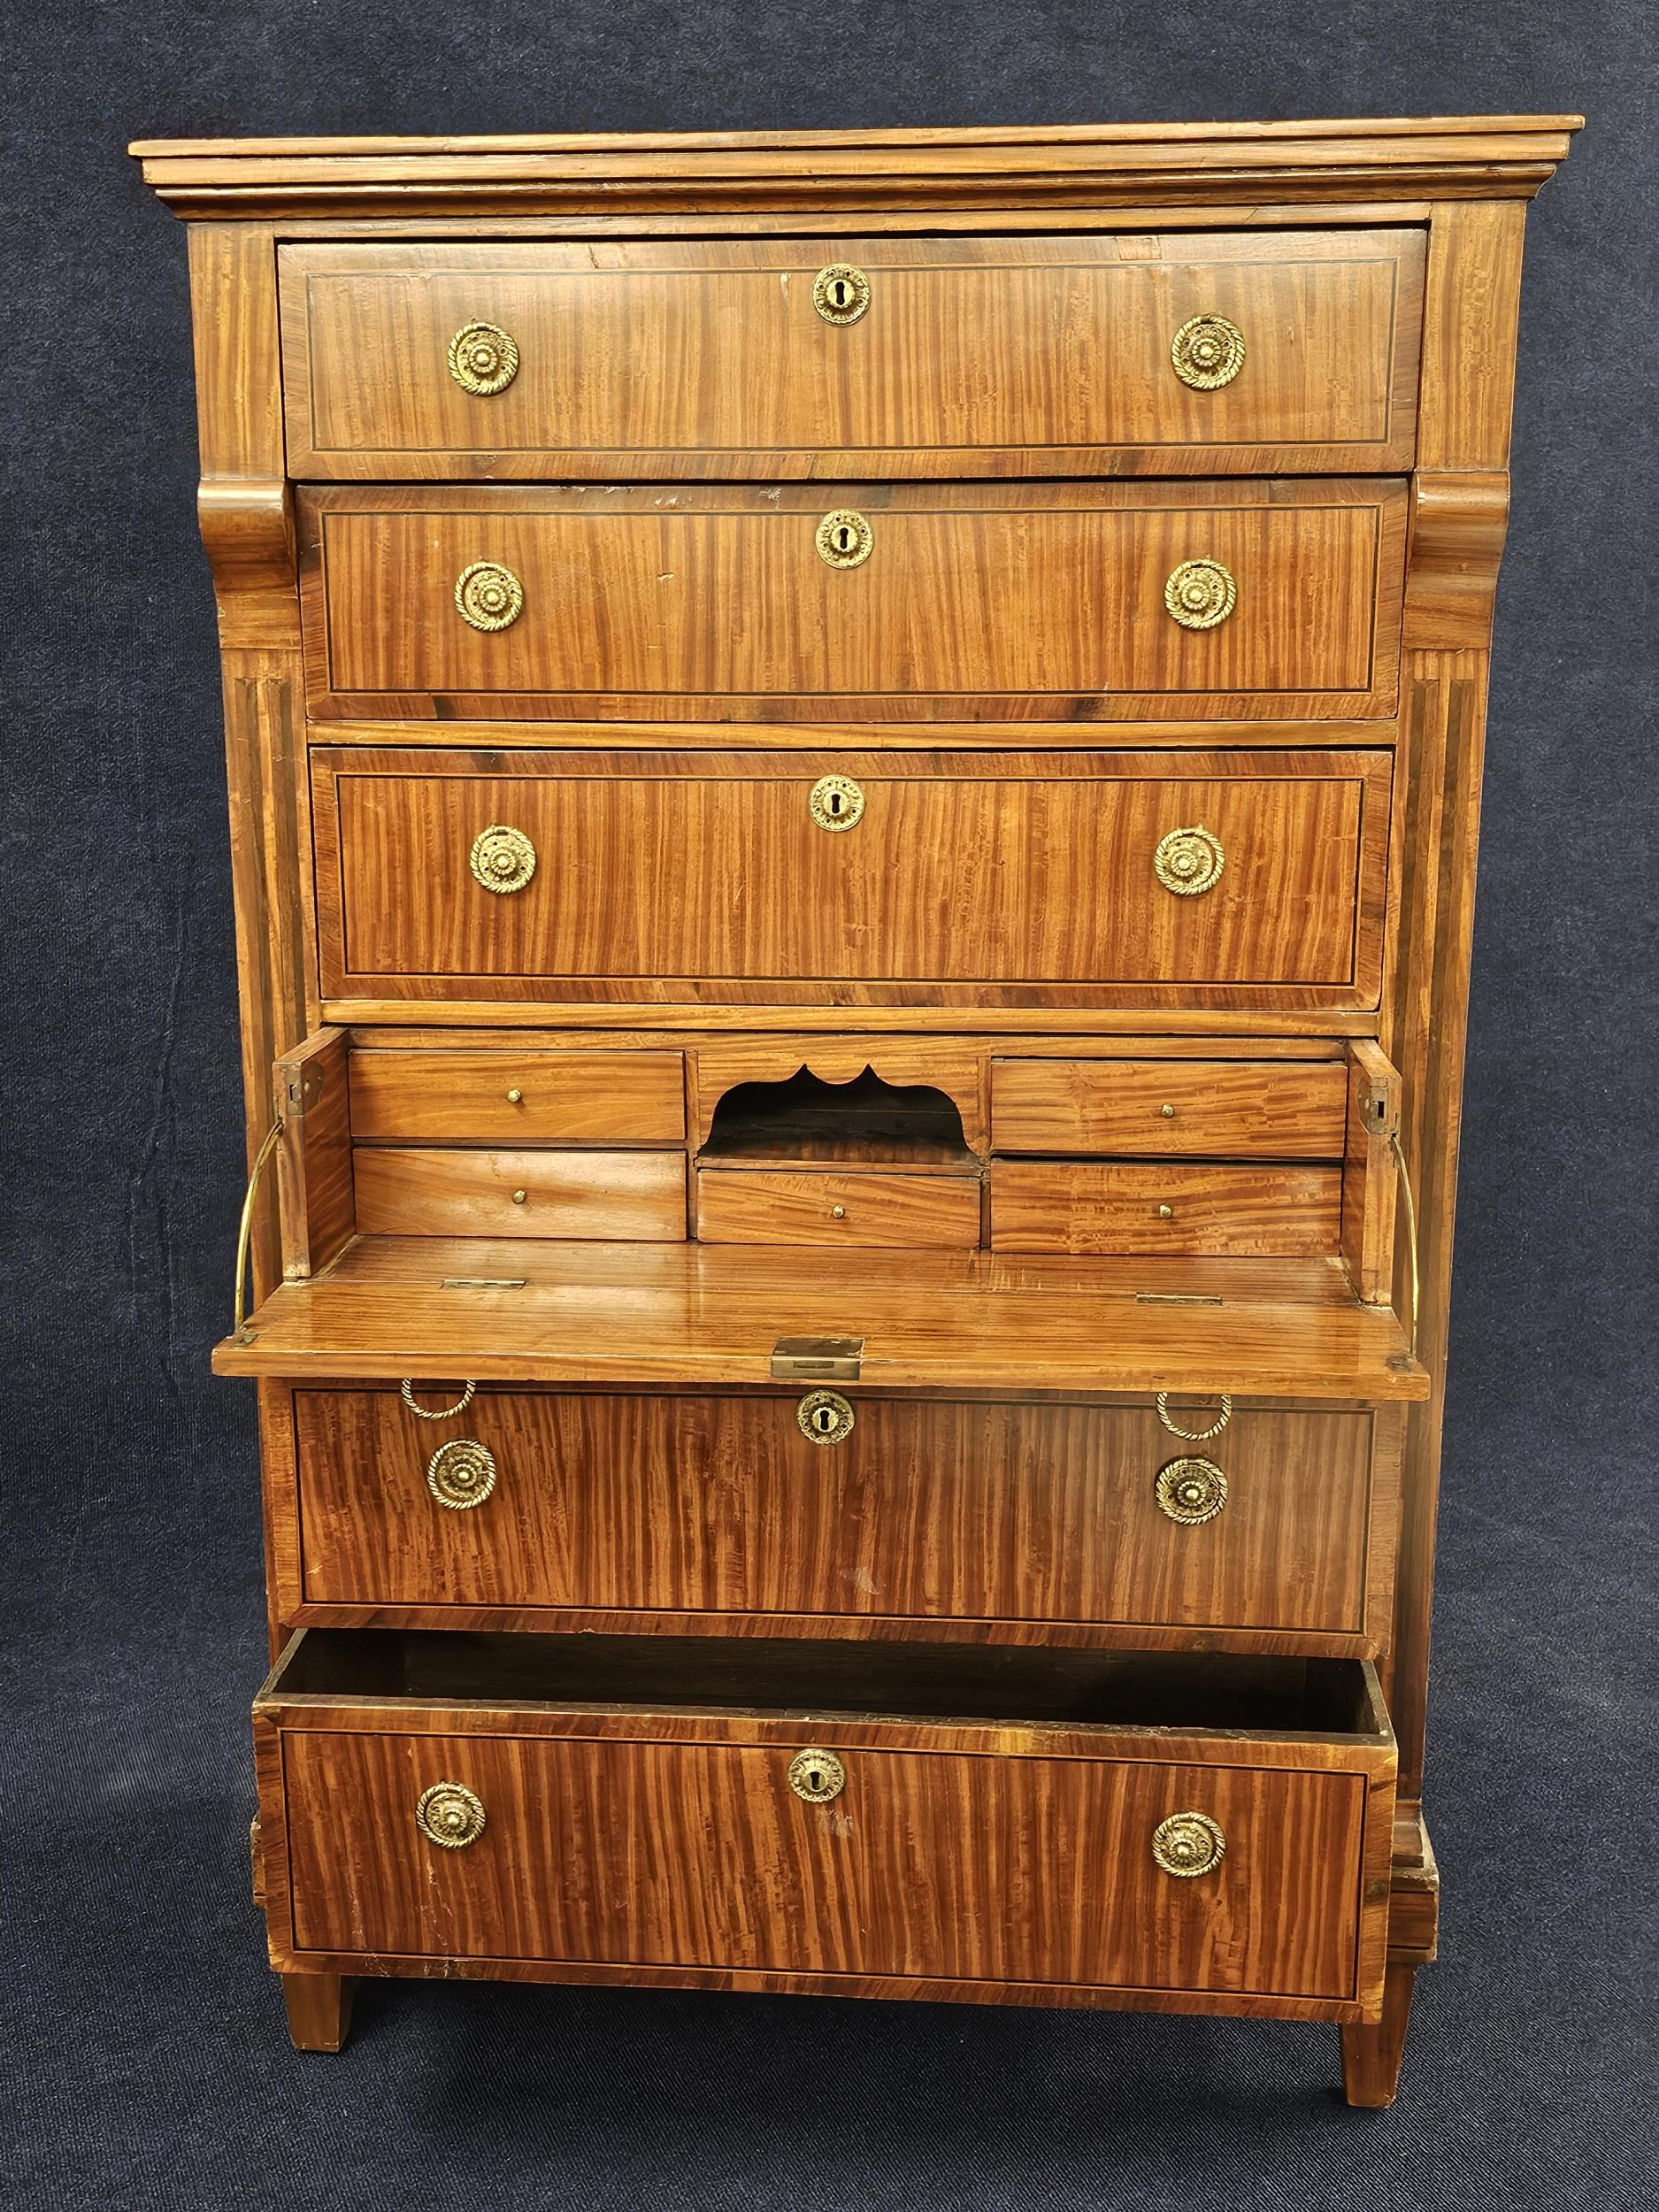 A 19th century Continental tall chest mahogany, kingwood with ebony and satinwood stringing, - Image 4 of 7